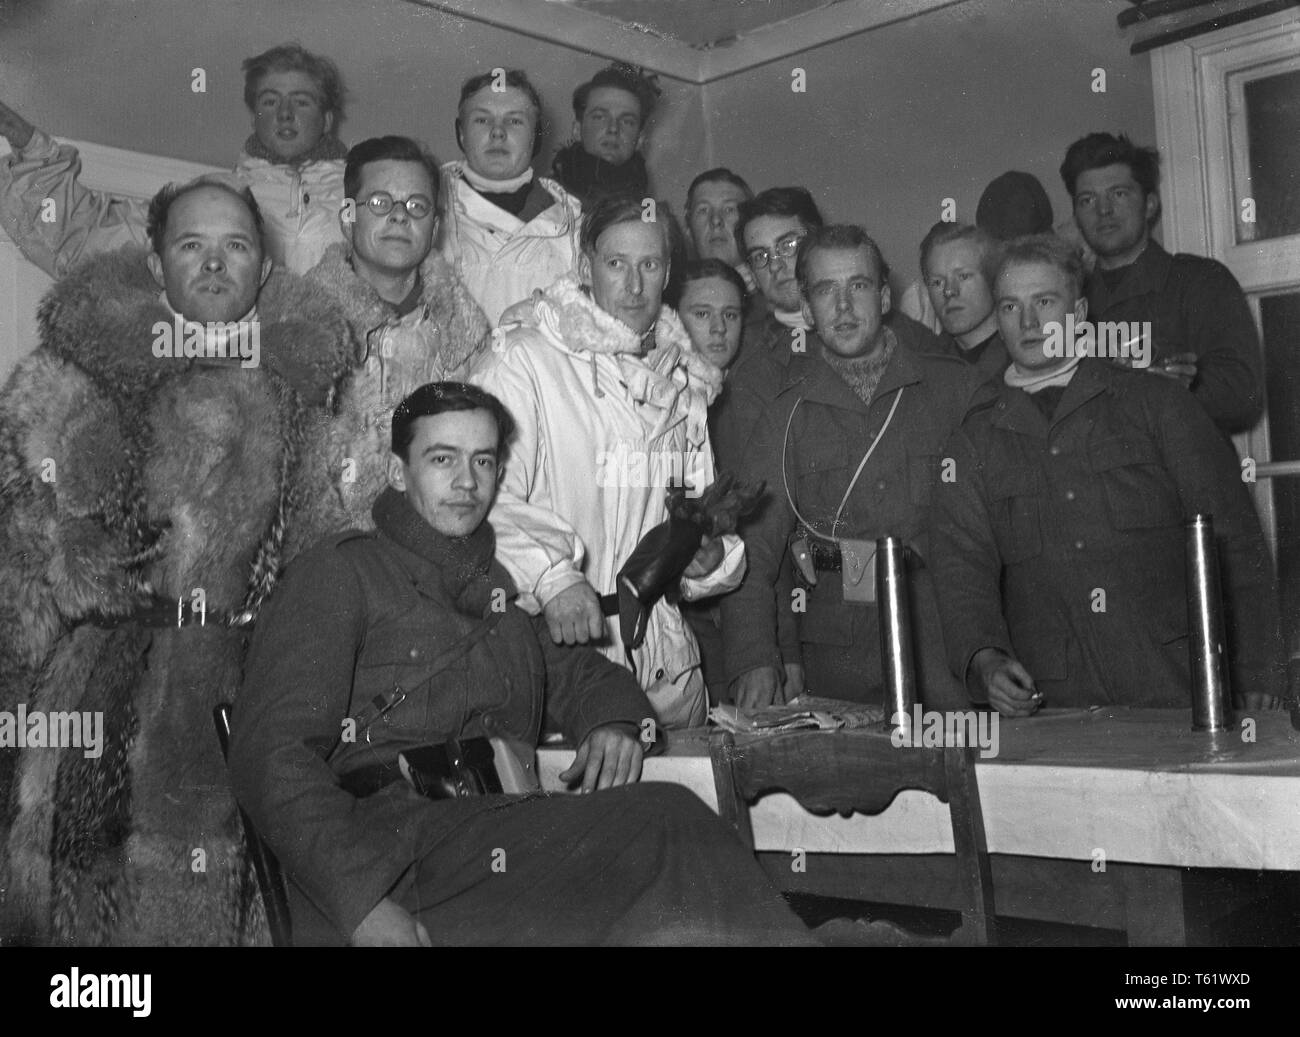 The Winter War. A military conflict between the Soviet union and Finland. It began with a Soviet invasion on november 1939 when Soviet infantery crossed the border on the Karelian Isthmus. About 9500 Swedish voluntary soldiers participated in the war. Swedish voluntary soldiers in their temporary quarterage. January 1940. Photo Kristoffersson ref 102-9 Stock Photo